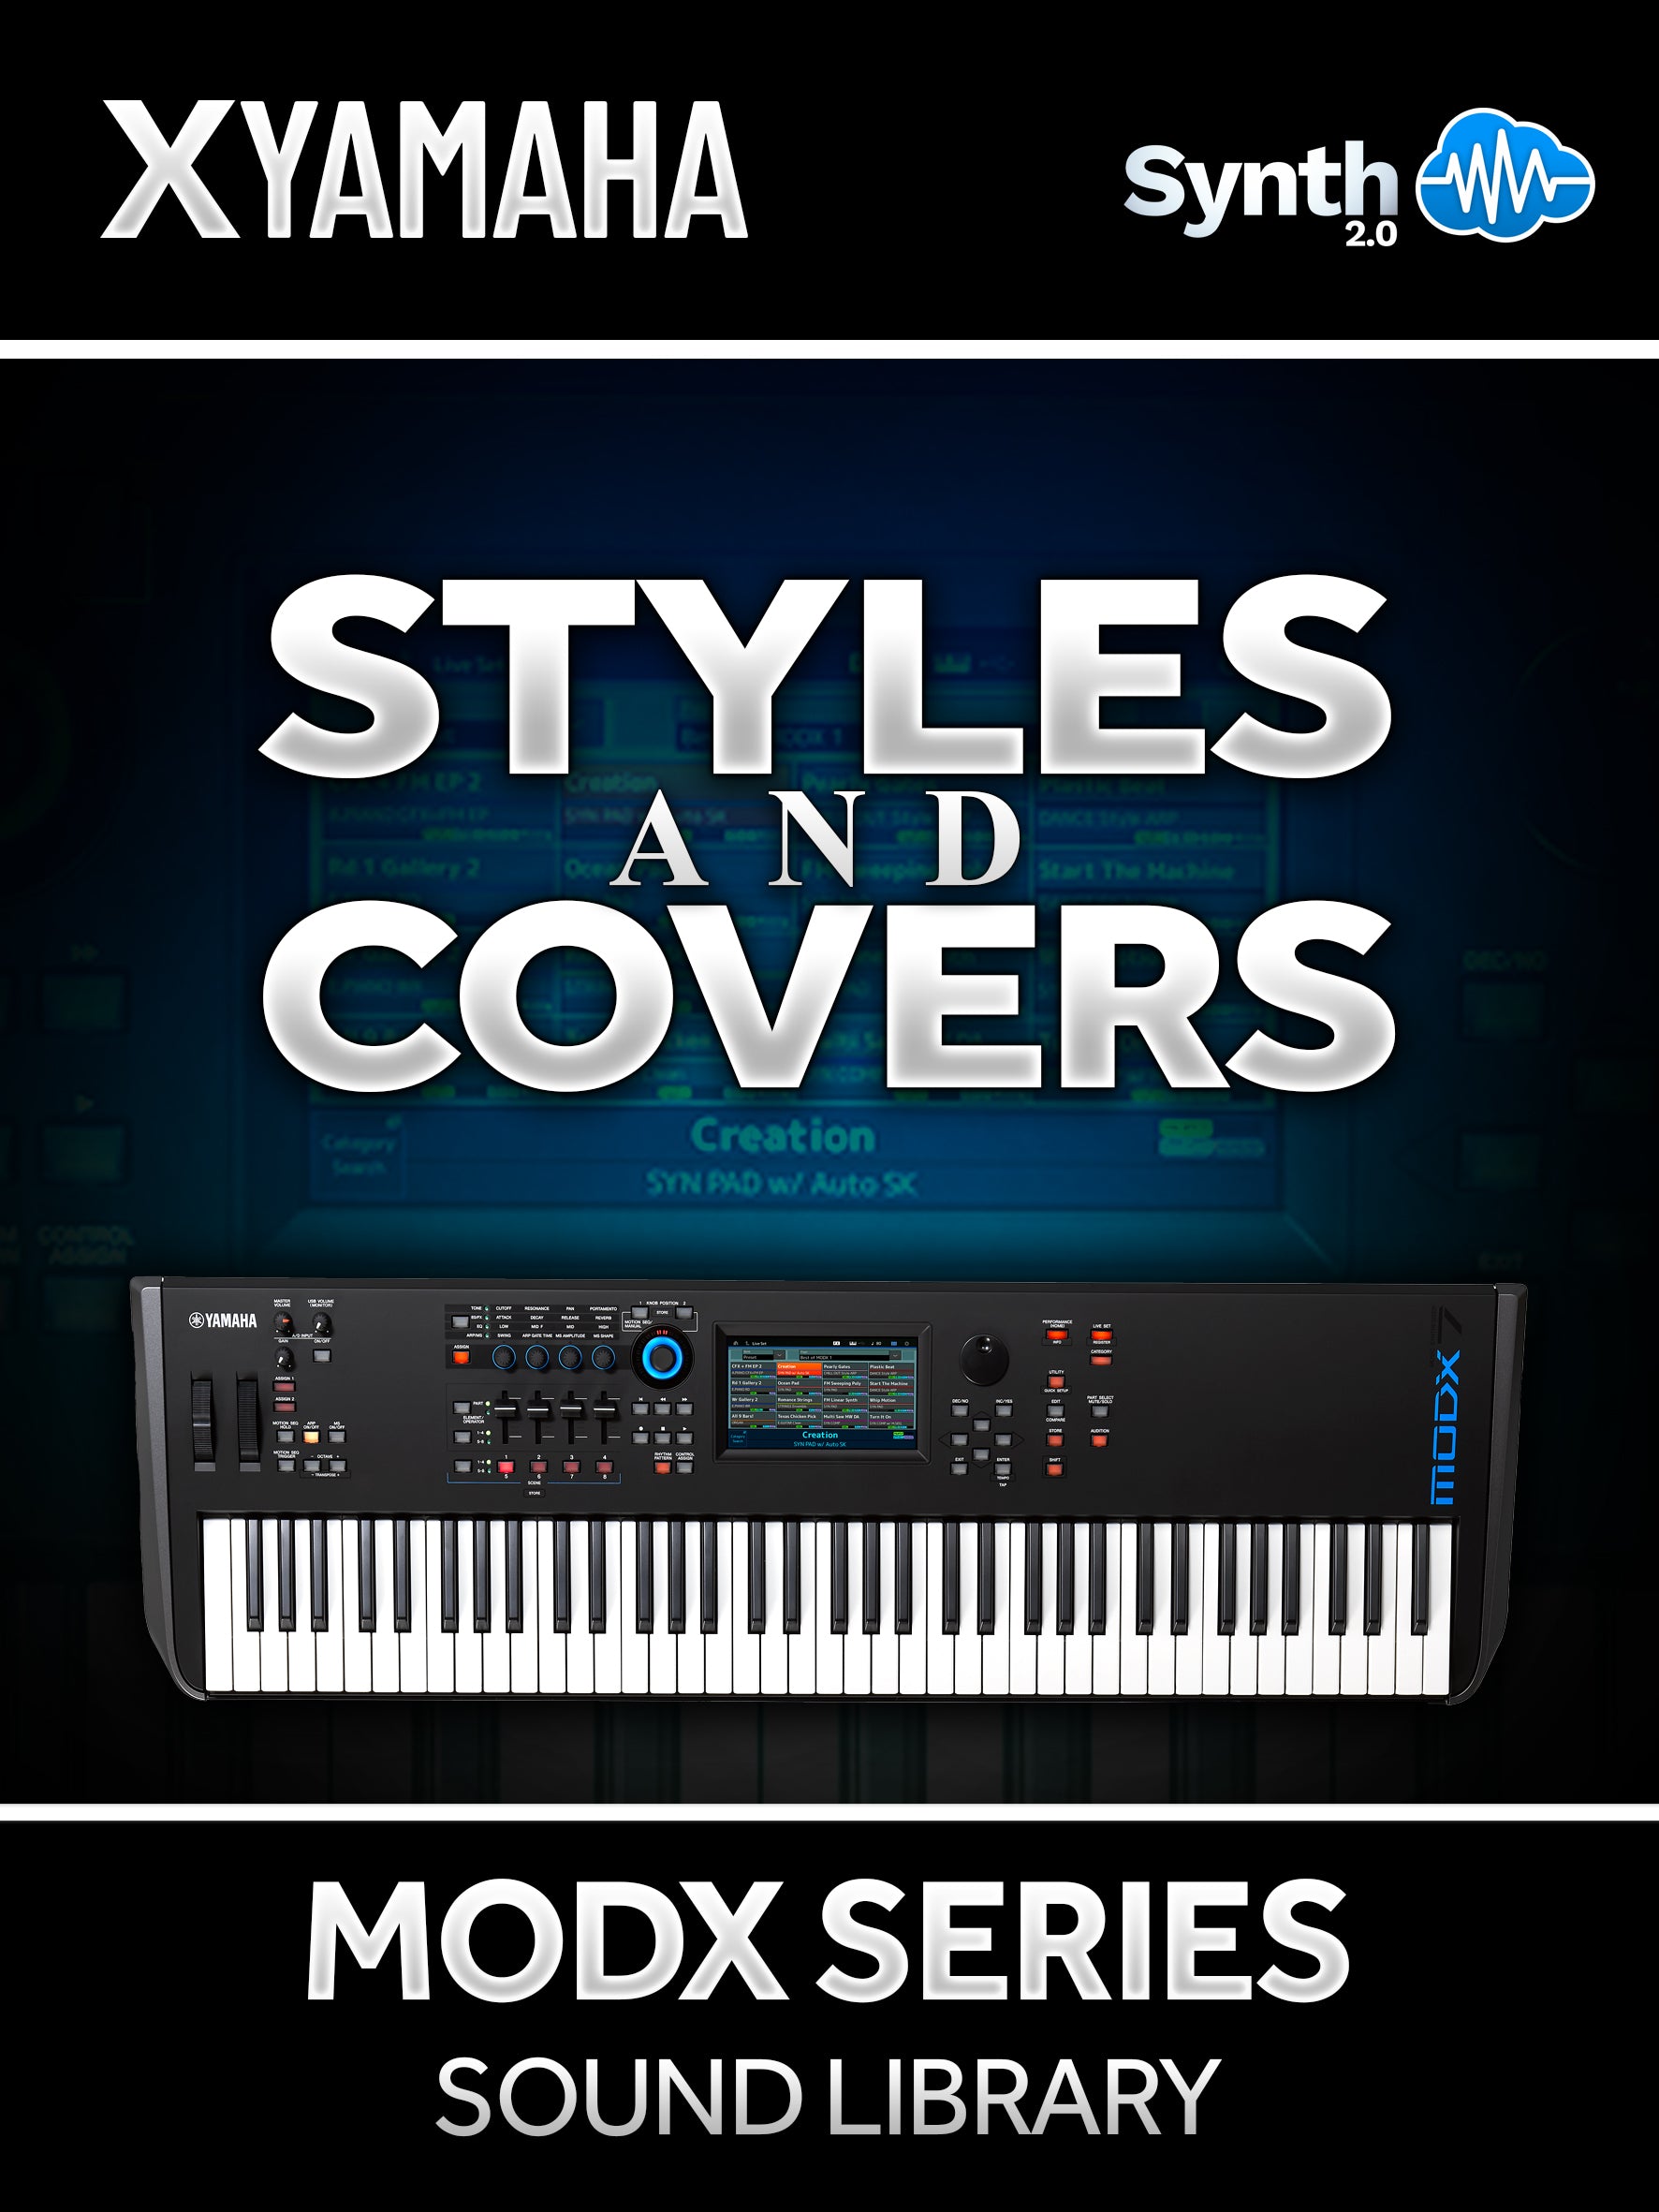 FPL048 - ( Bundle ) - Styles and Covers + Coverlogia Vol.1 - Yamaha MODX / MODX+